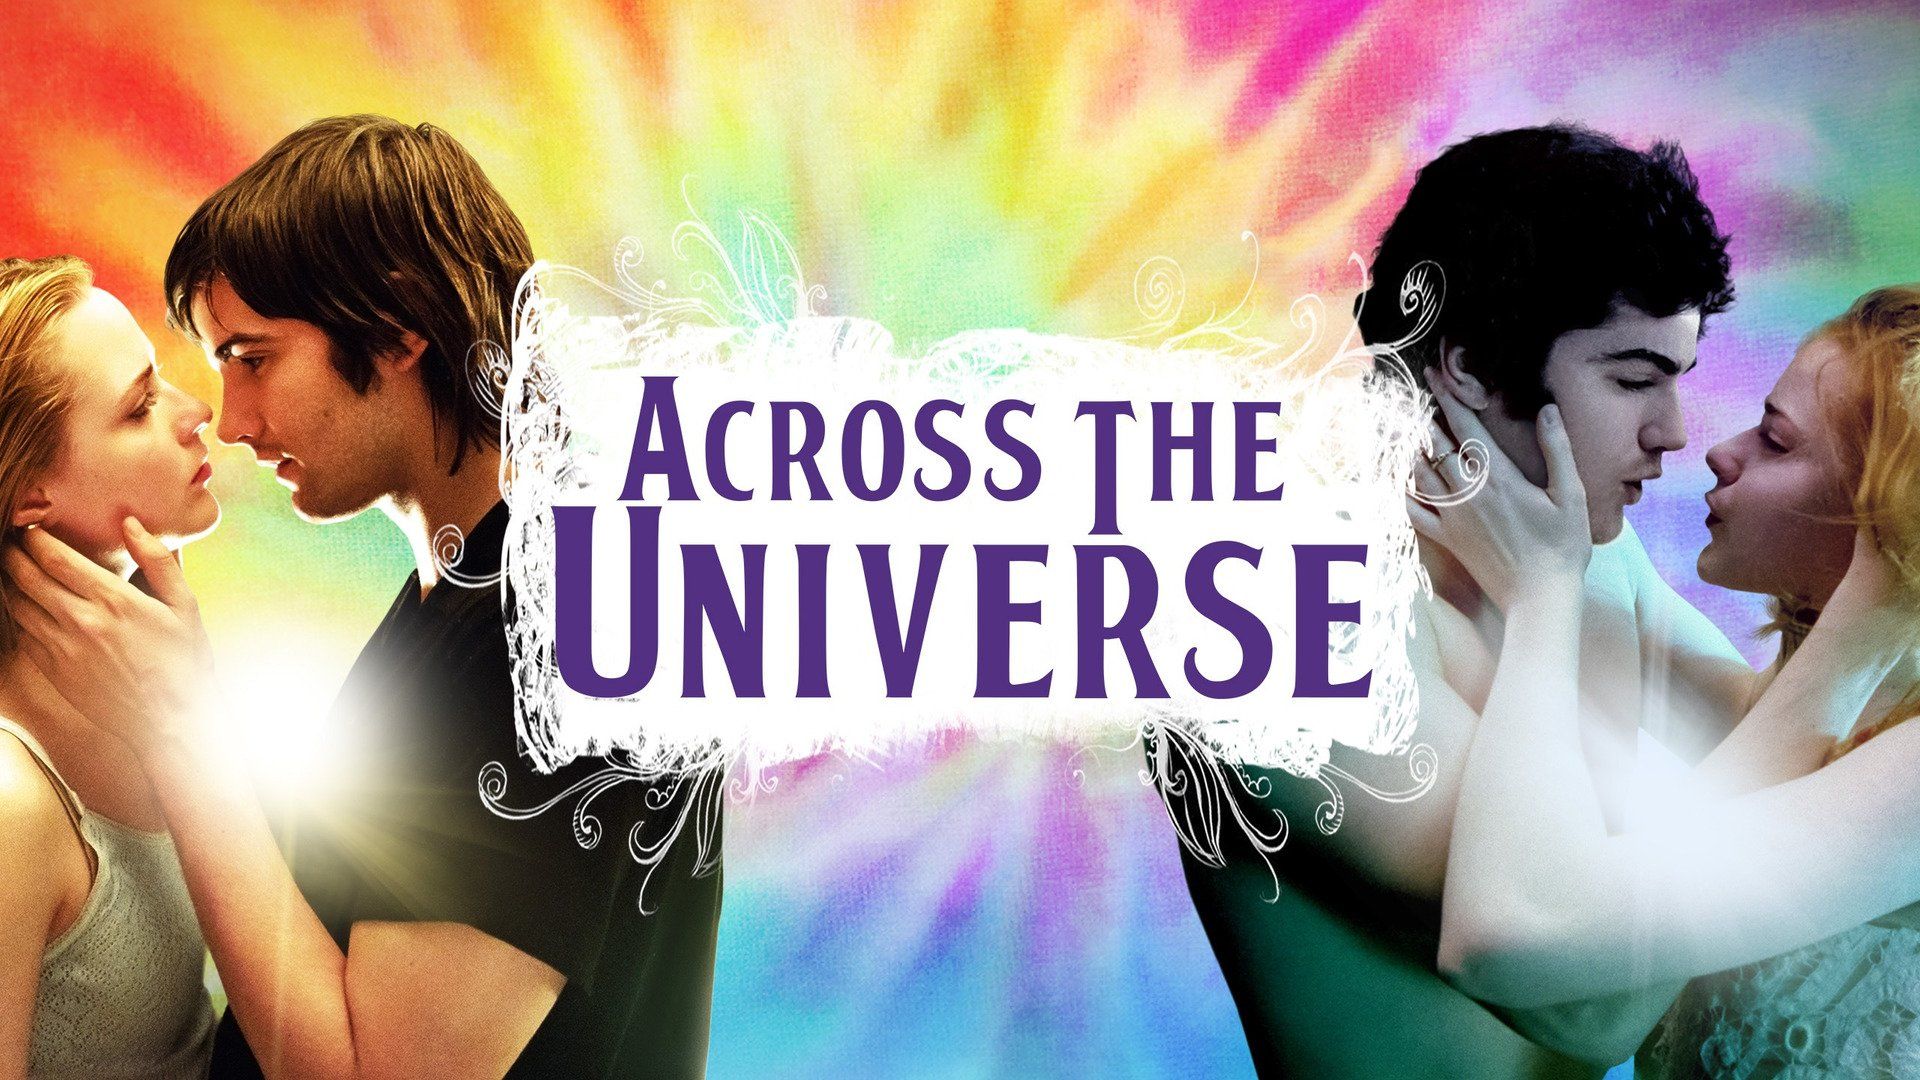 across the universe movie poster